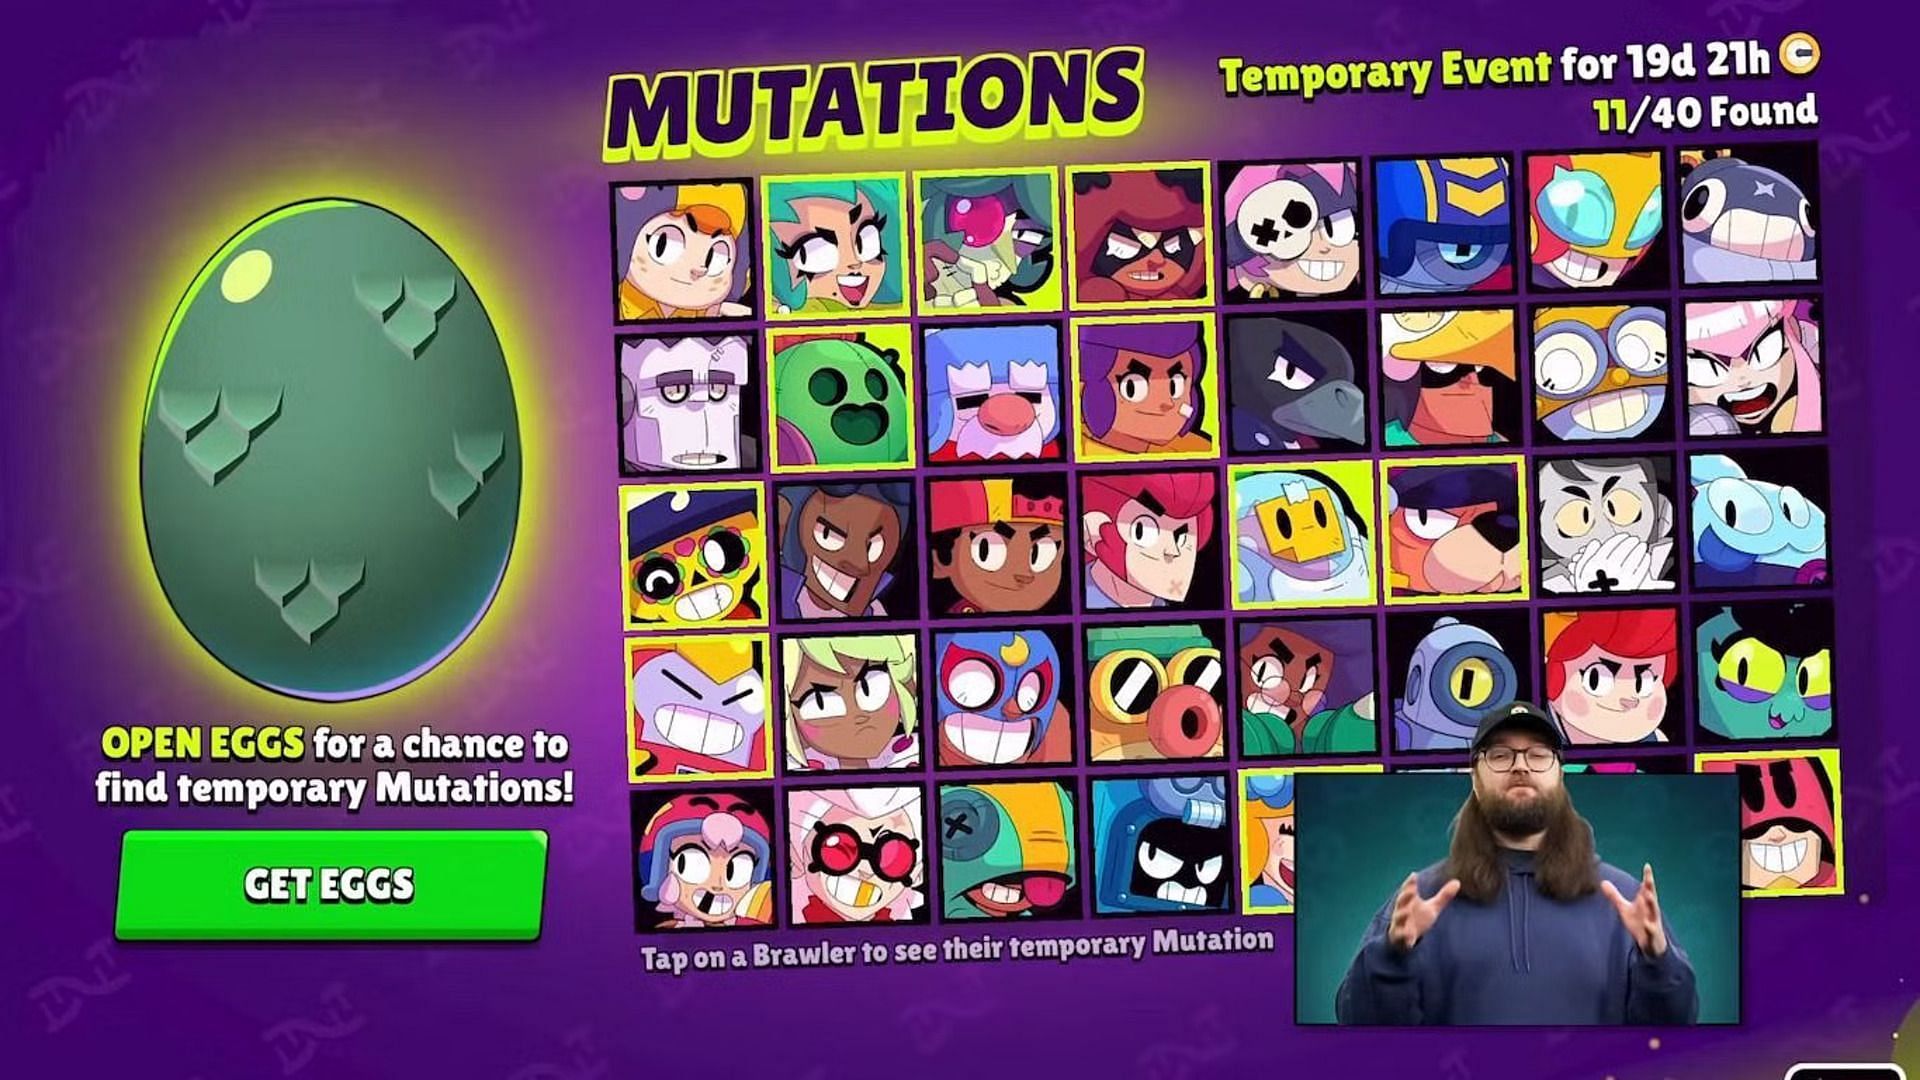 All brawlers that are eligible for Mutation. (Image via Supercell)